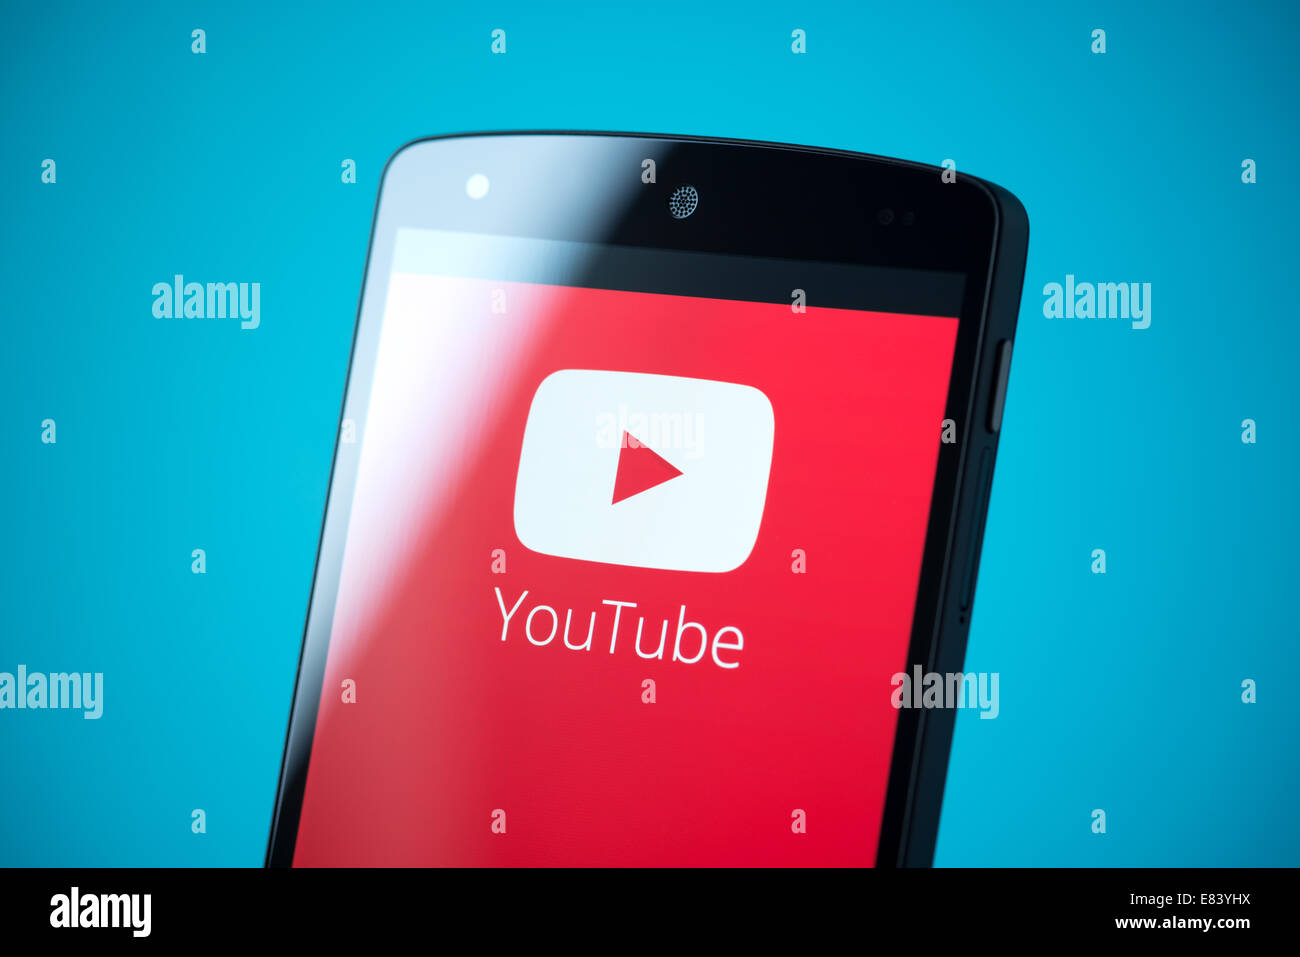 Close-up shot of brand new Google Nexus 5, powered by Android 4.4 version, with YouTube logotype on a screen. Stock Photo